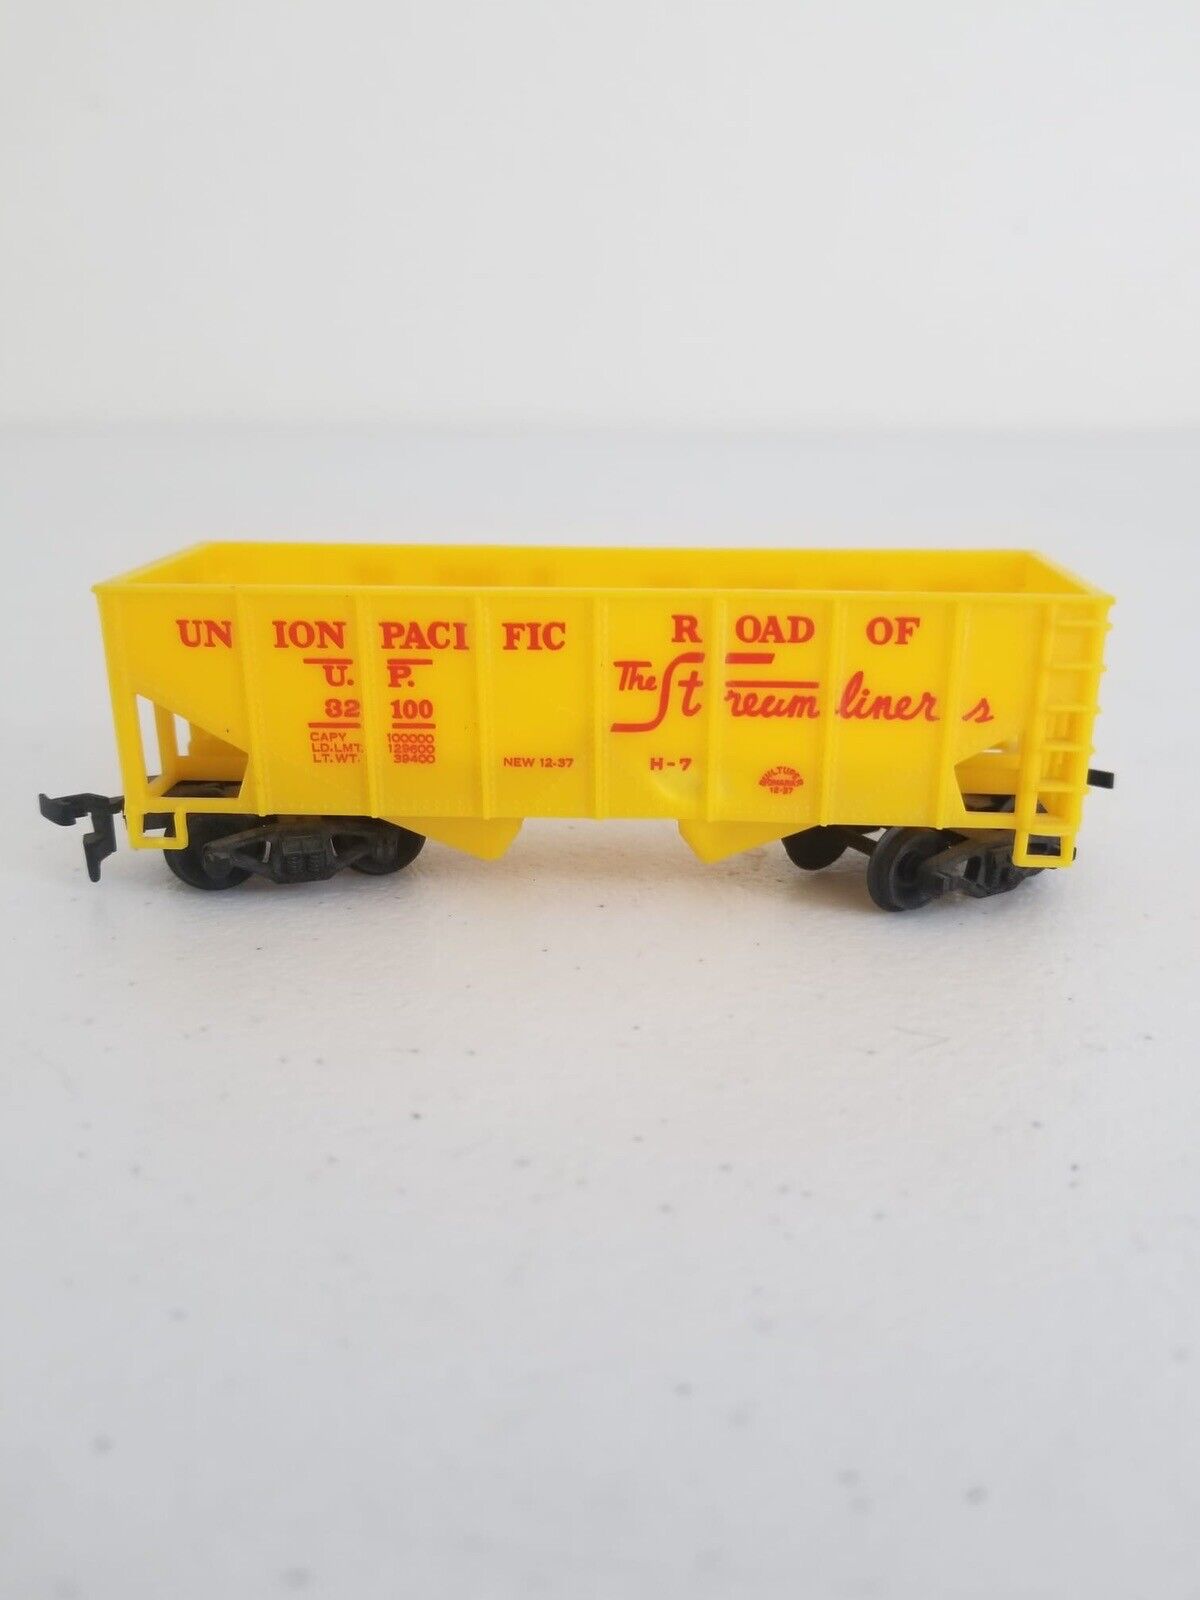 Vintage Train Car Lot: Snickers, Hormel, Southern Pacific - 6 Collectible Boxcars - TreasuTiques